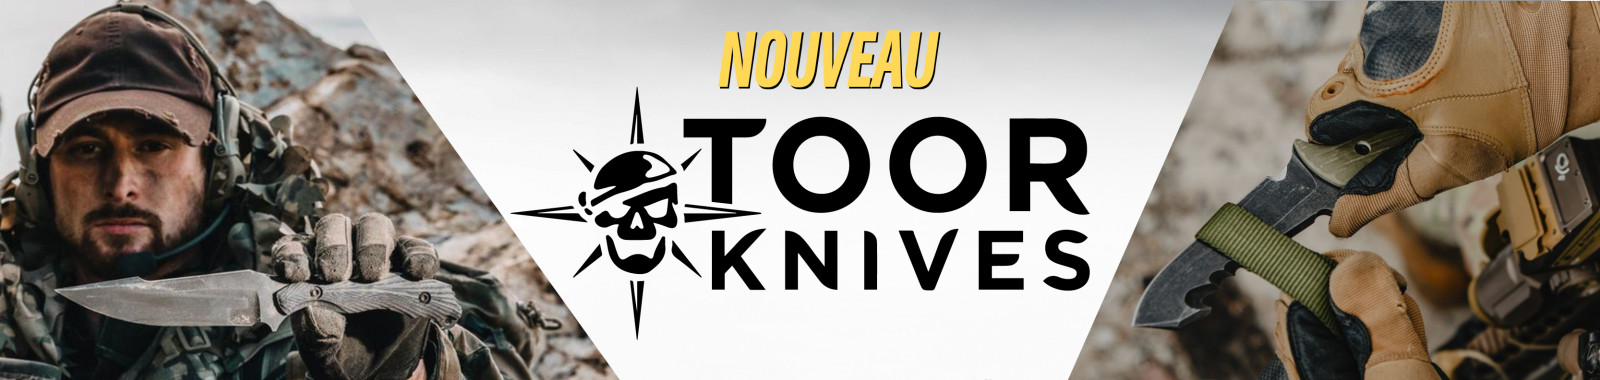 Nouvelle marque : TOOR KNIVES